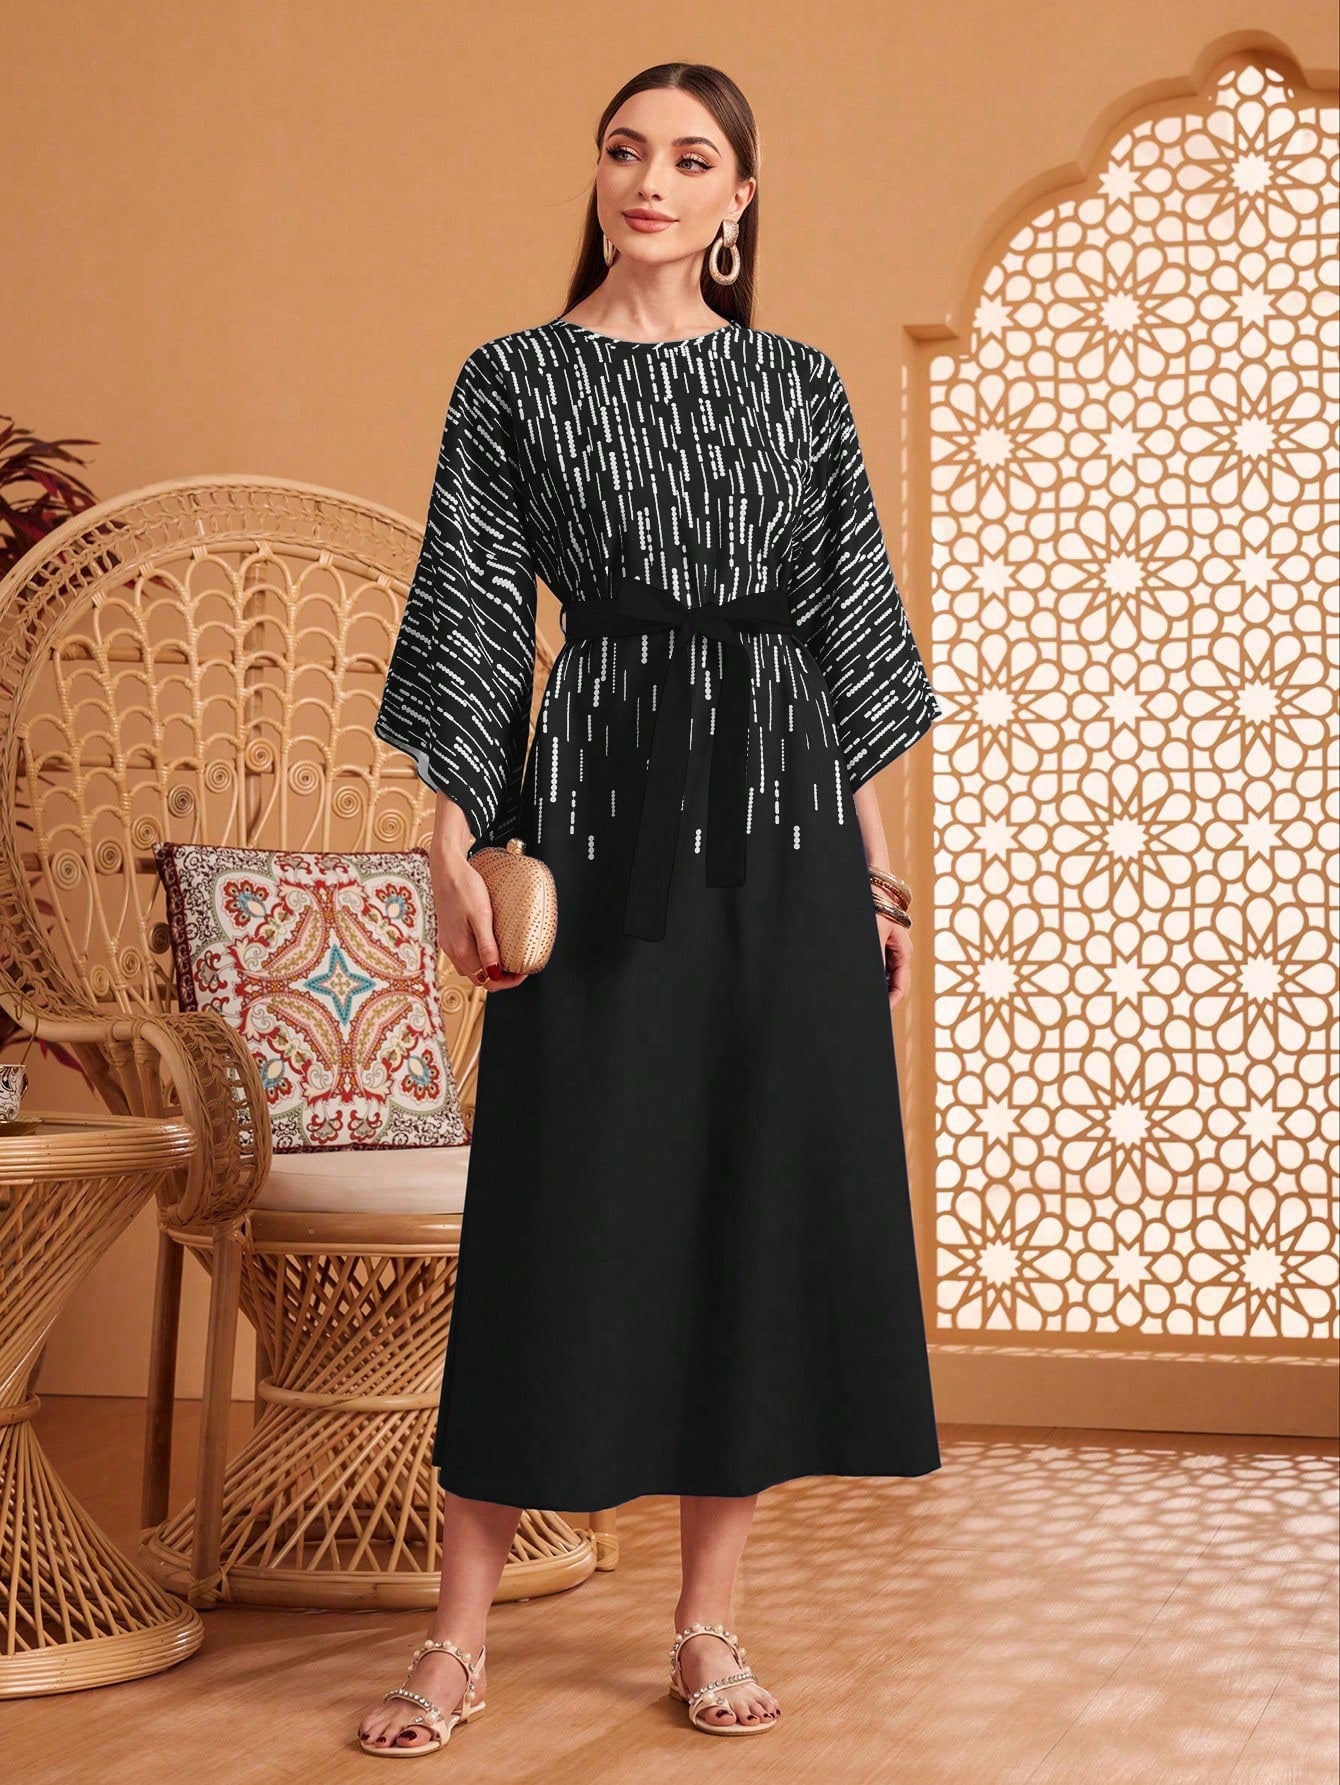 Ladies' Round Neck Printed Knee-Length Dress With Three-Quarter Sleeves, Suitable For Spring And Summer